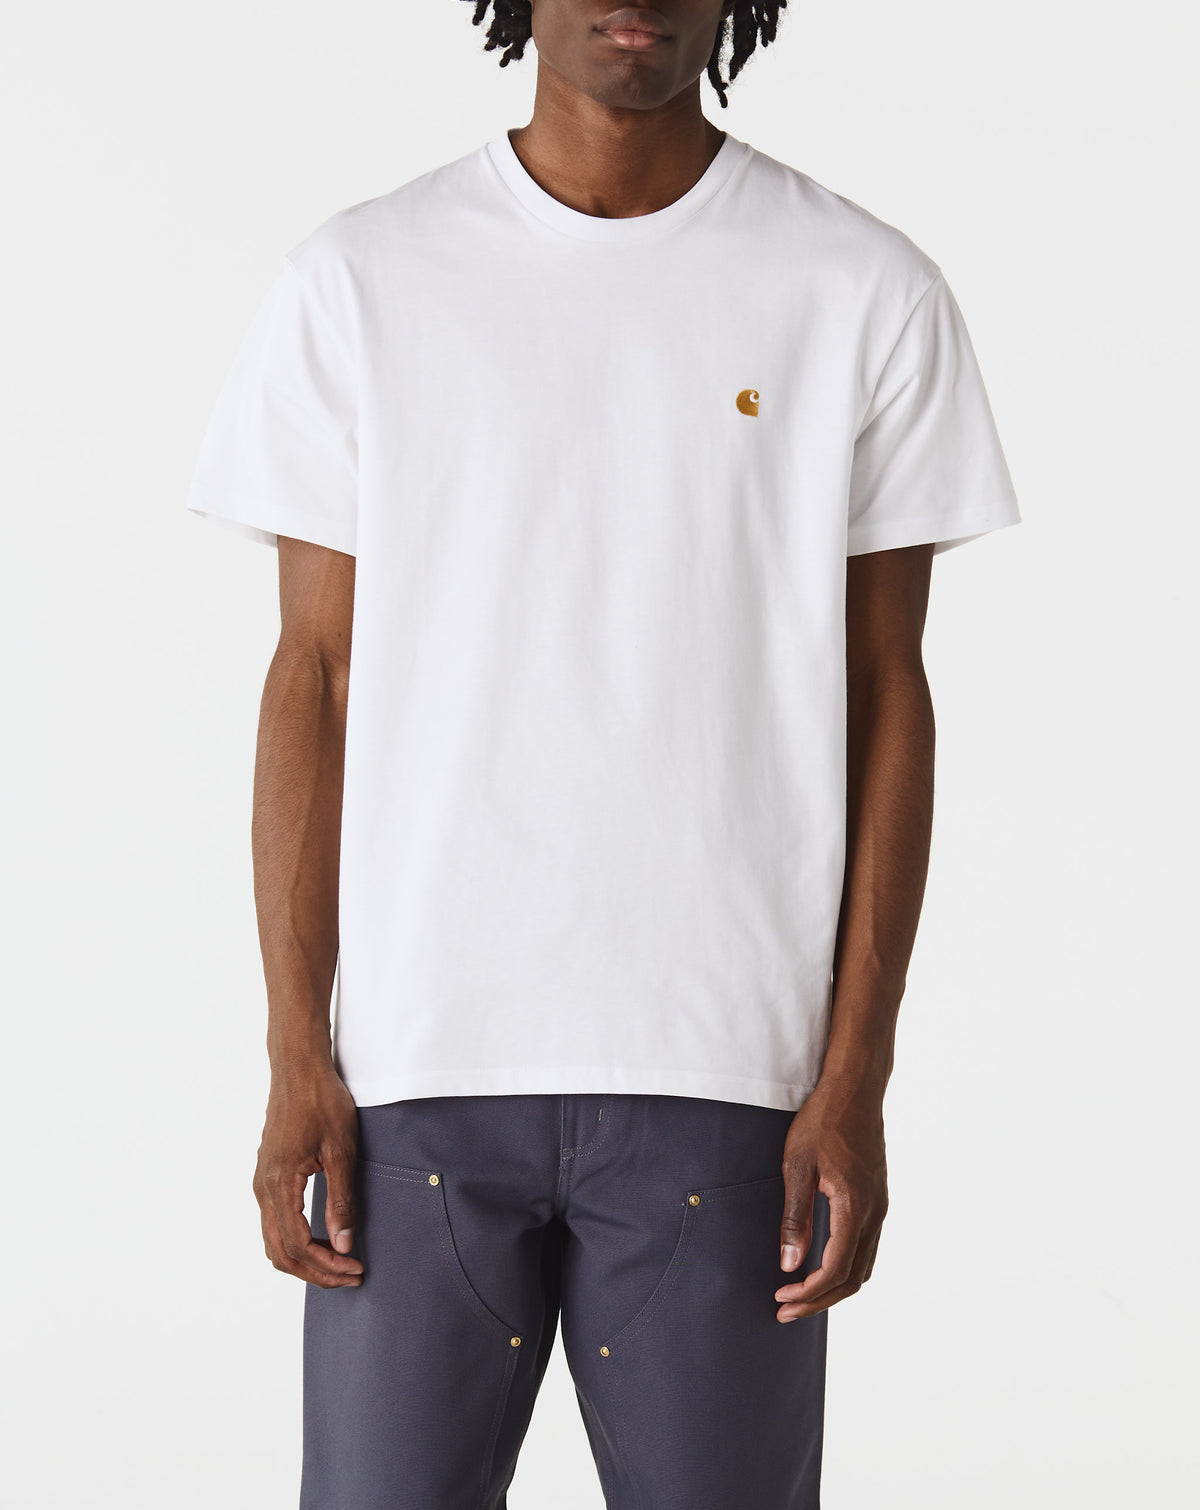 Carhartt WIP Chase T-Shirt - Rule of Next Apparel